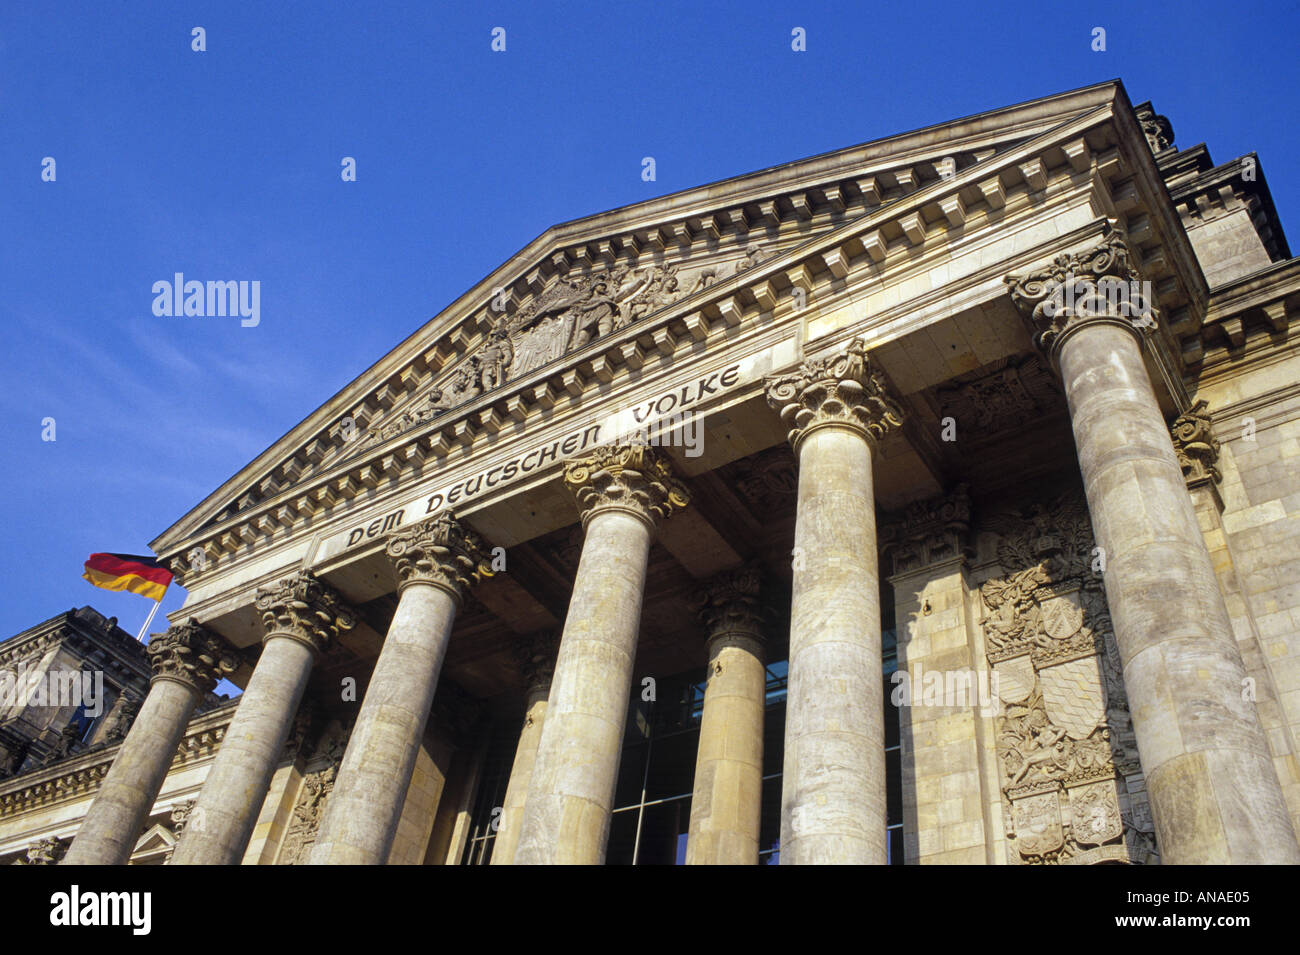 A low angle view of the facade of the Reichstag building in Berlin Germany Stock Photo